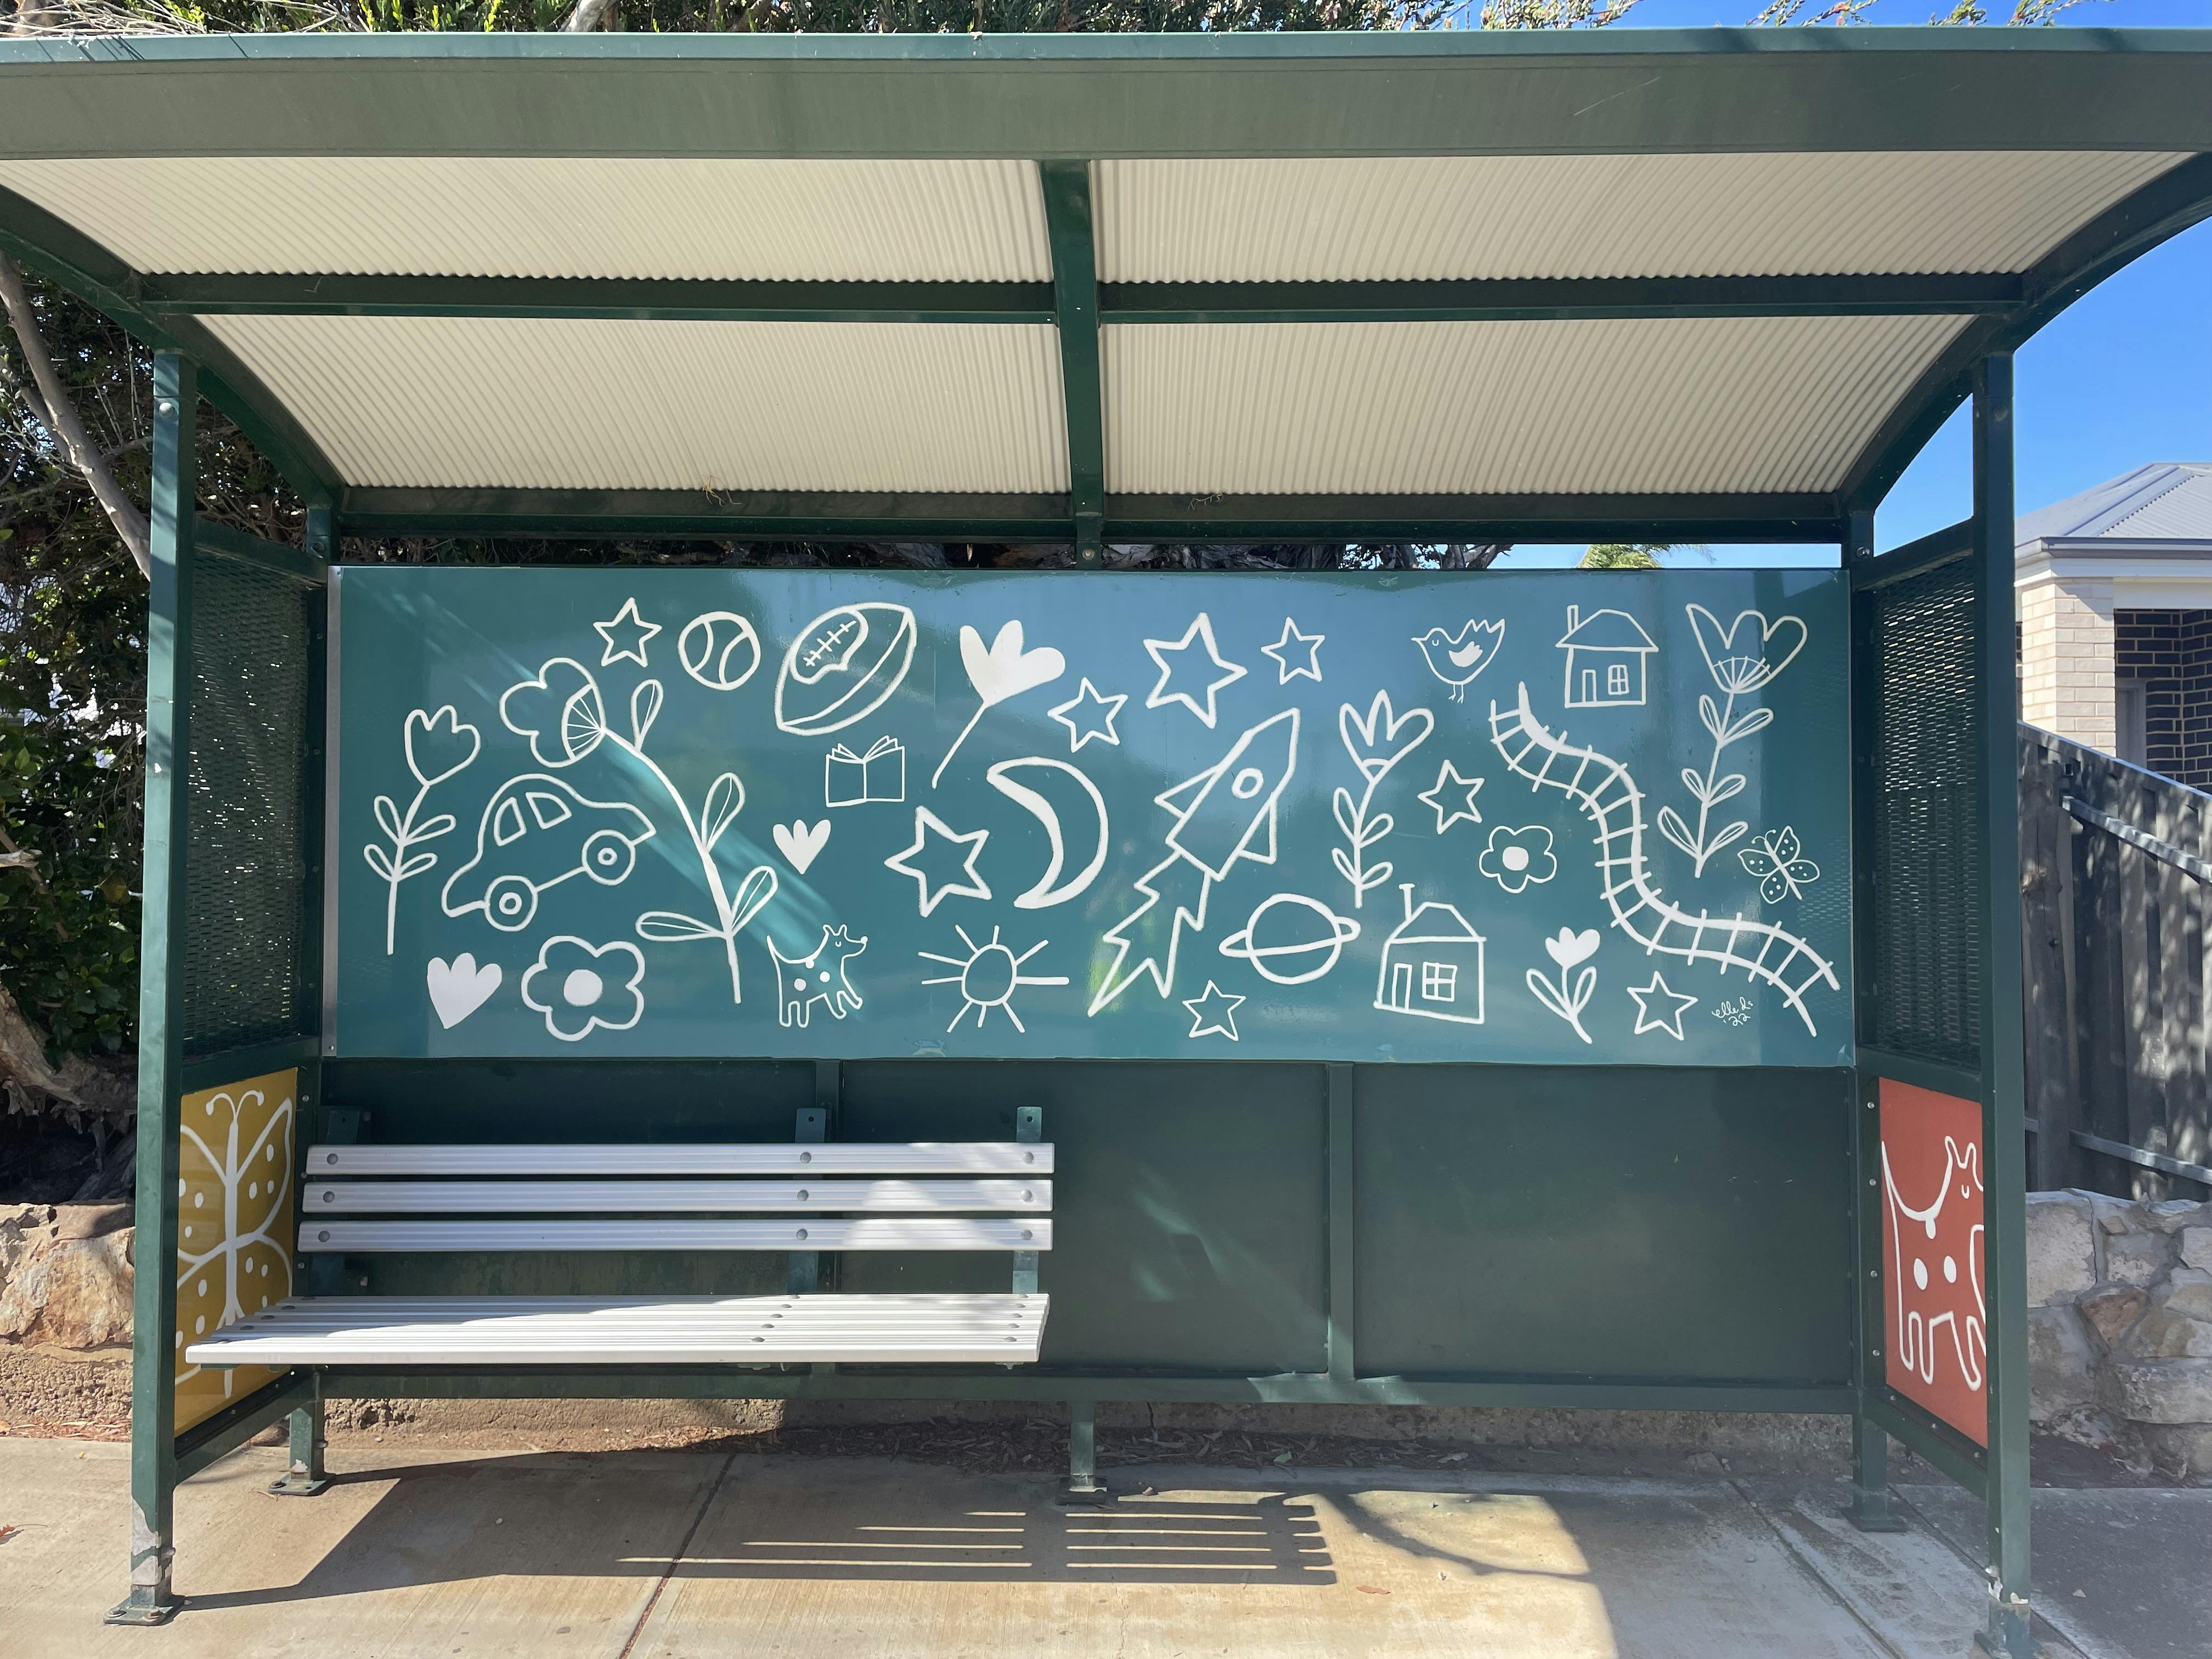 Bus shelter installation by Saskia and Shadow 2023. Celtic Avenue, Clovelly Park. Commissioned by City of Marion